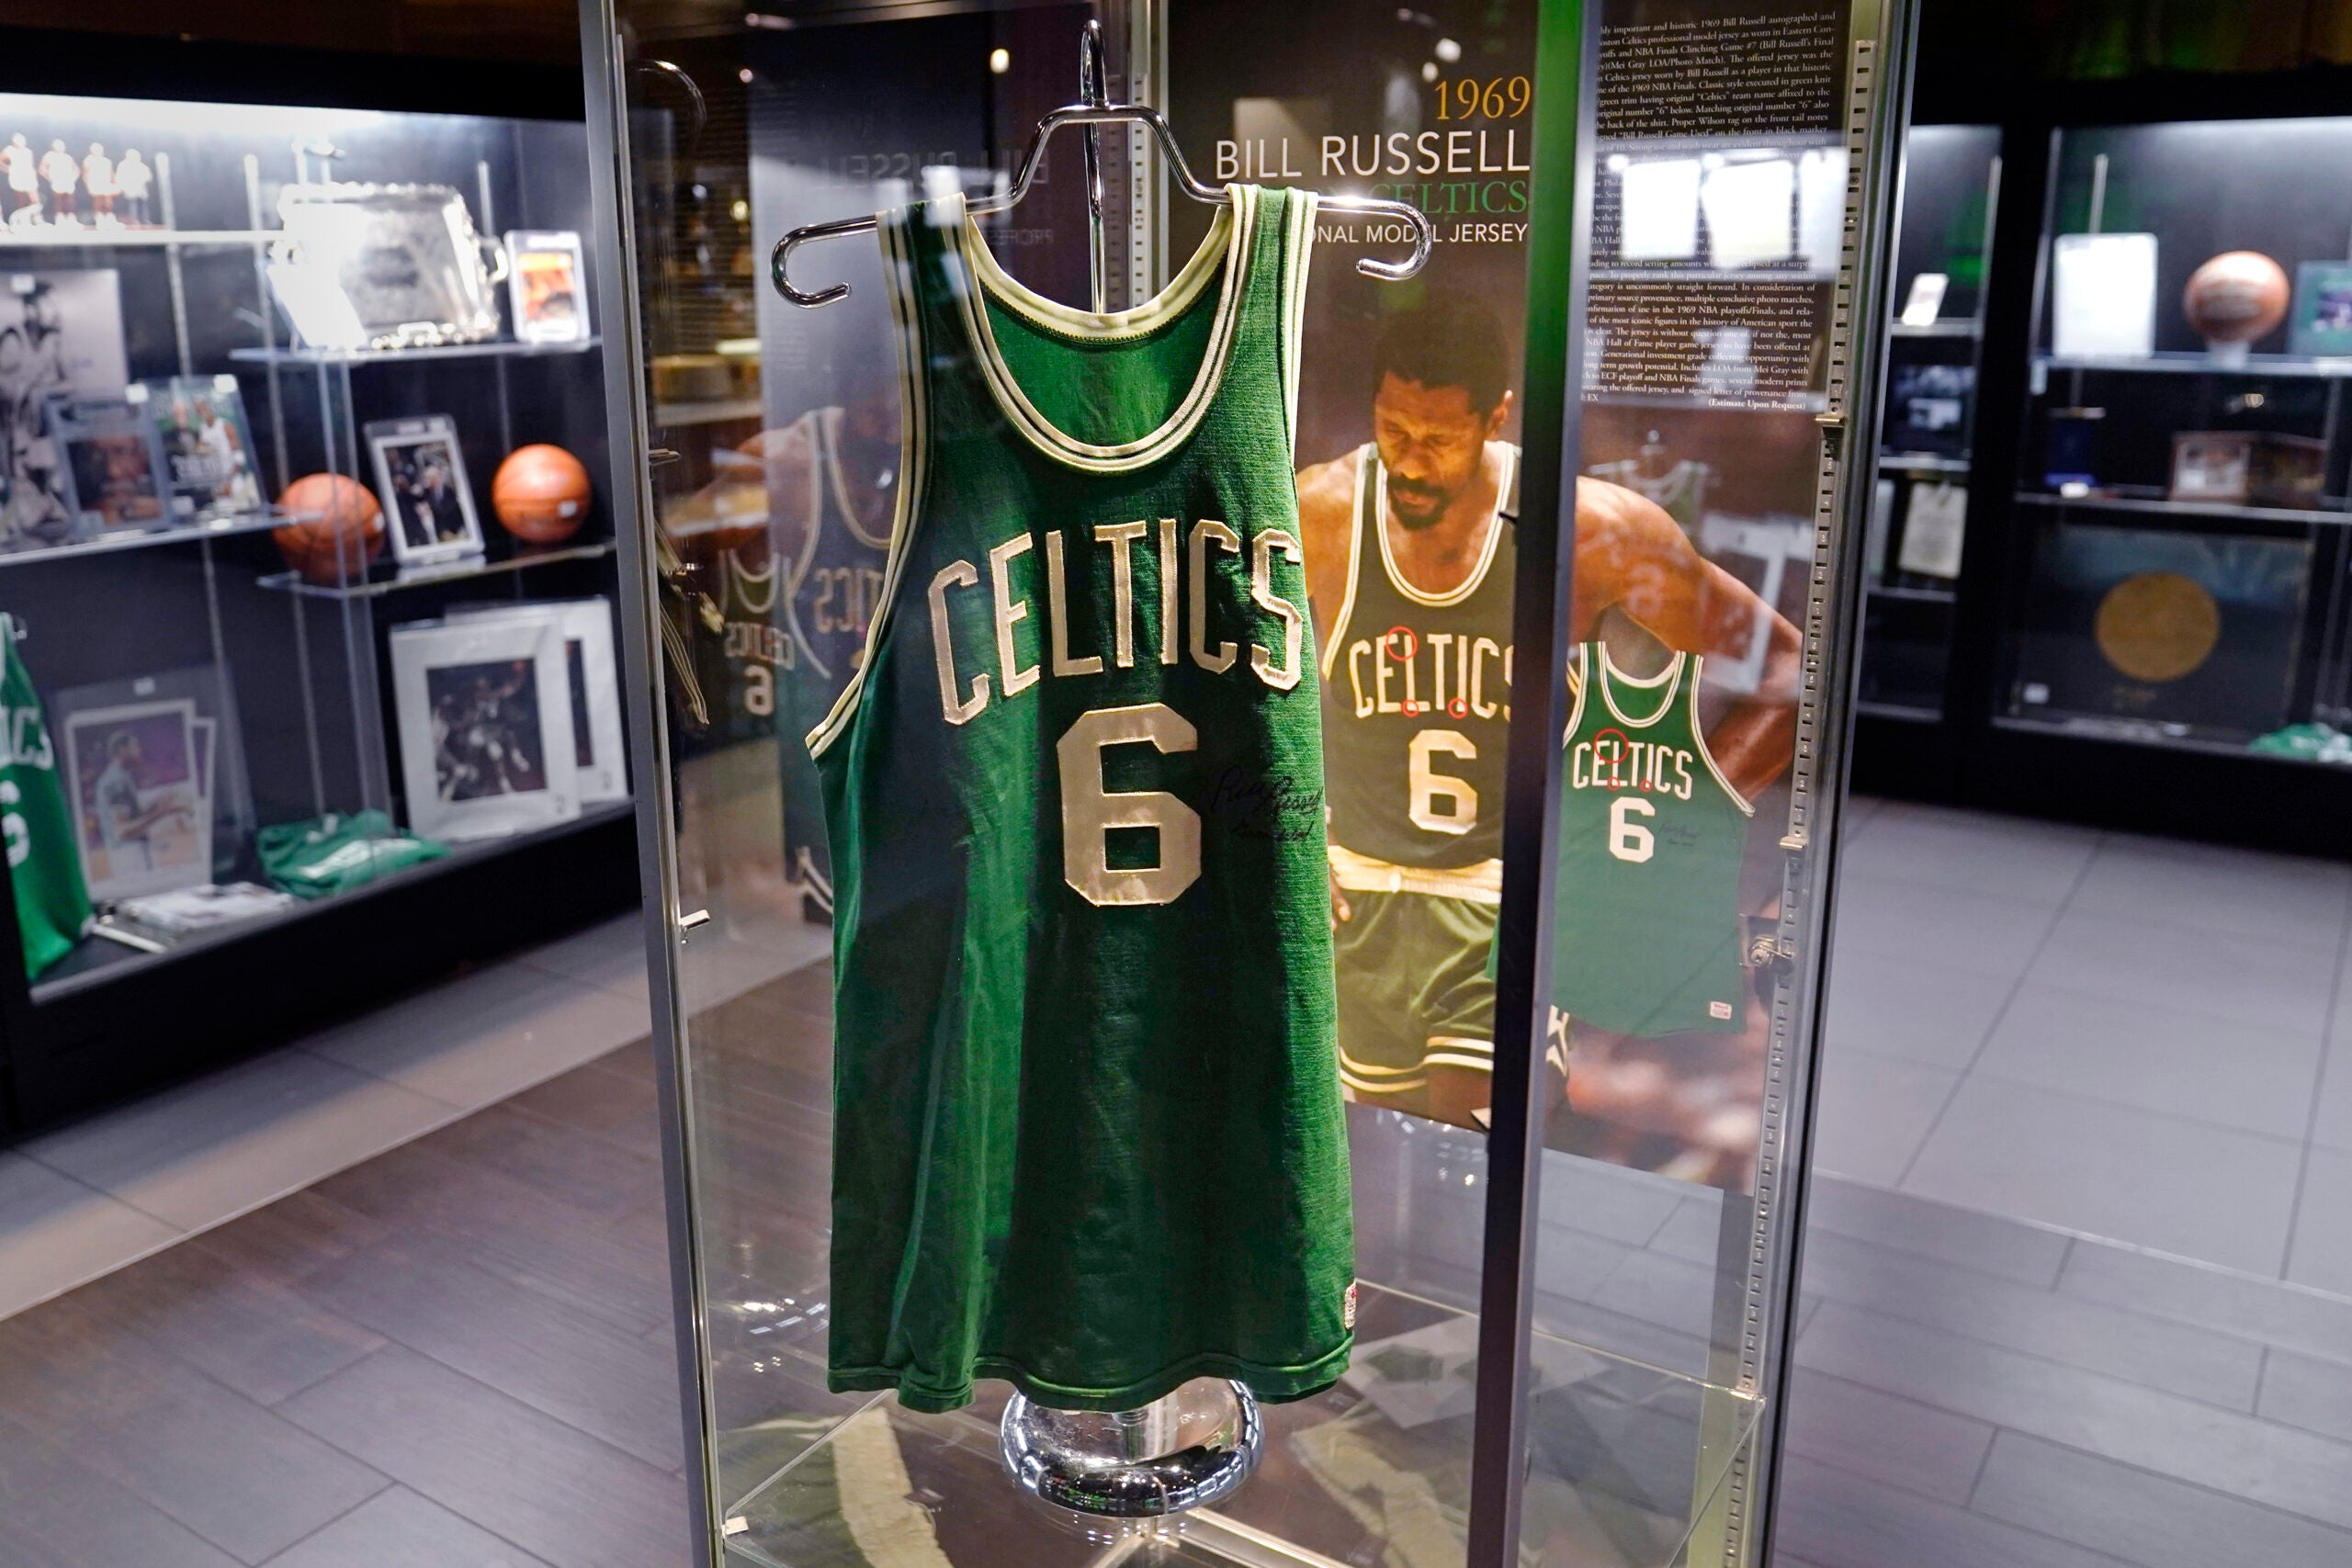 Bill Russell becomes first NBA player to have number retired league-wide